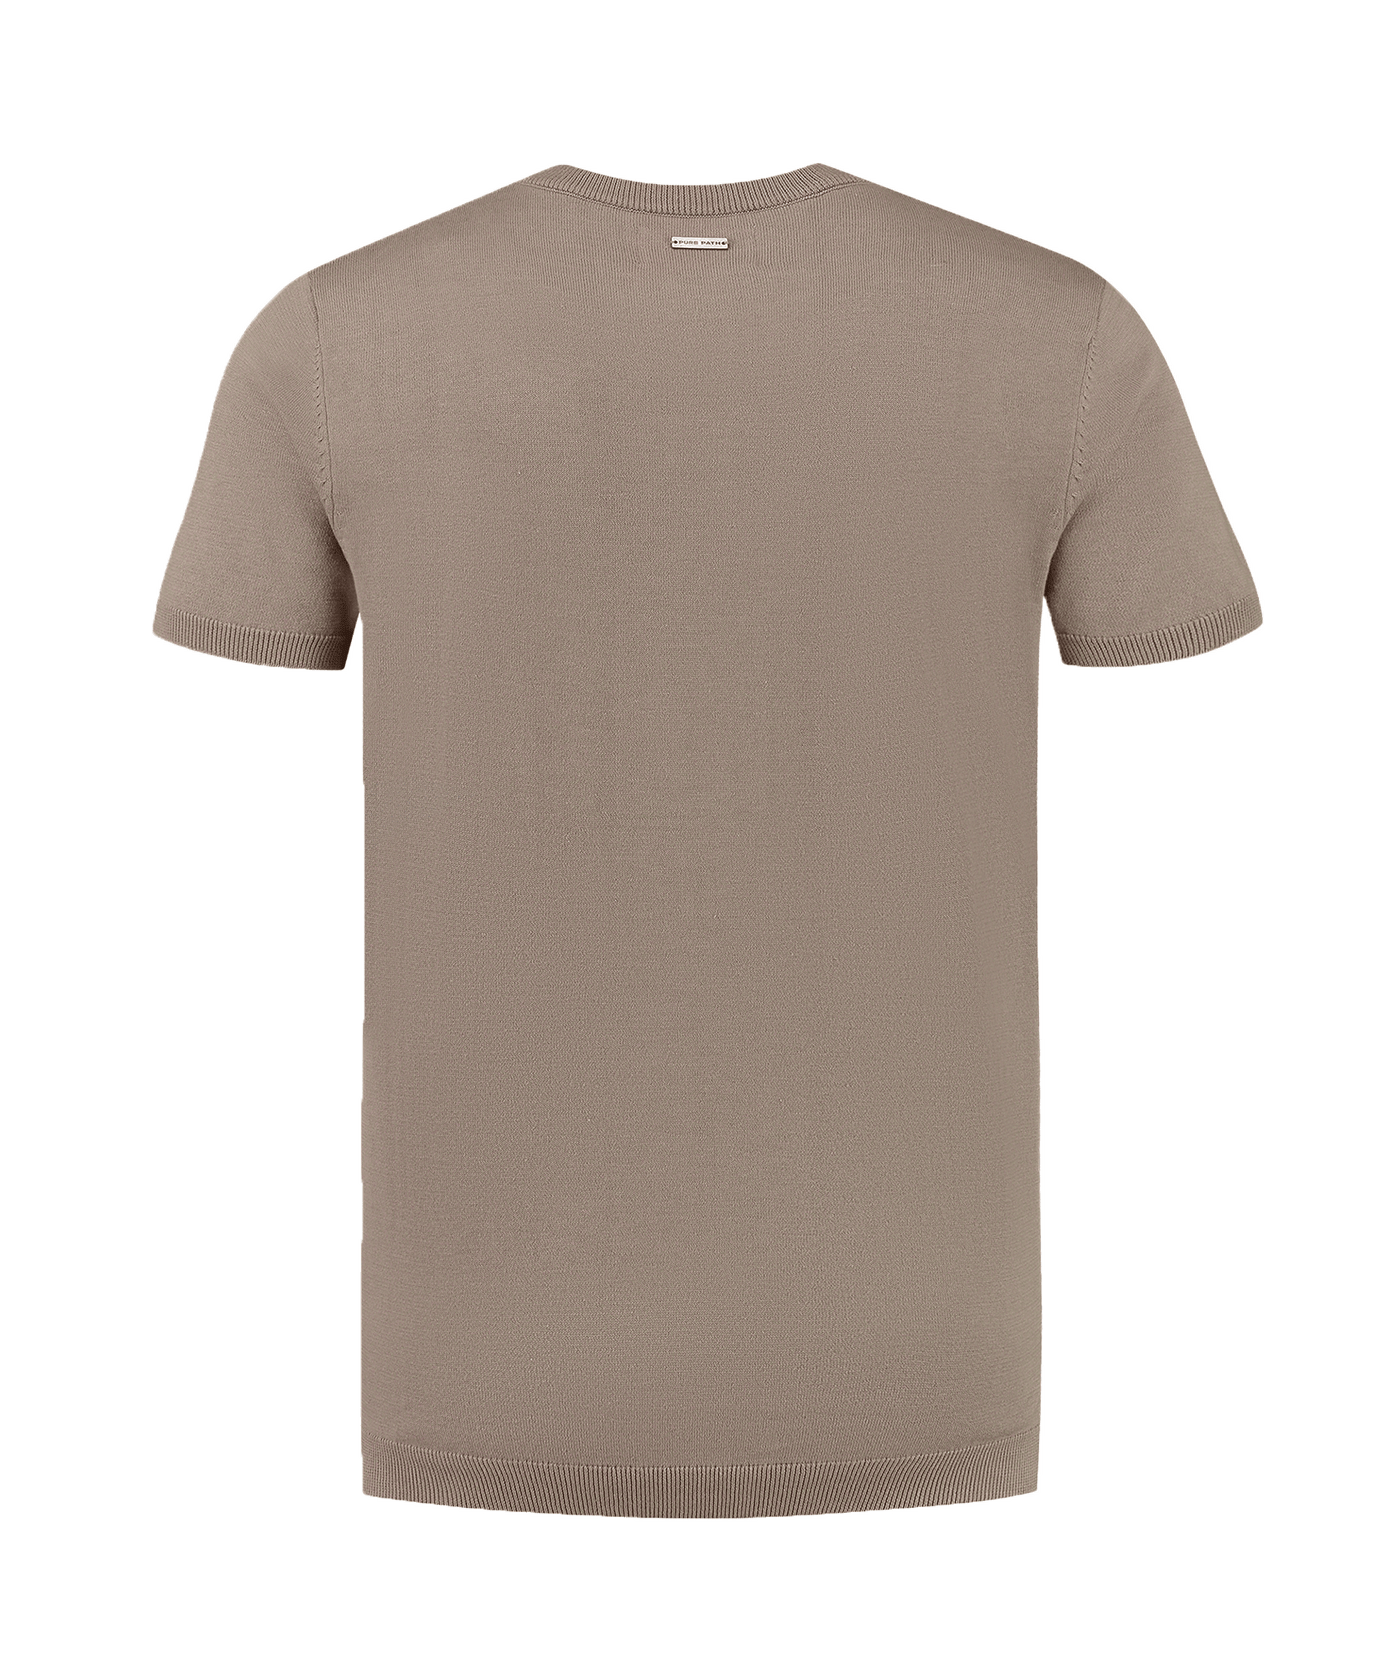 Pure Path - 24010806 - Knitwear T-shirt - Taupe